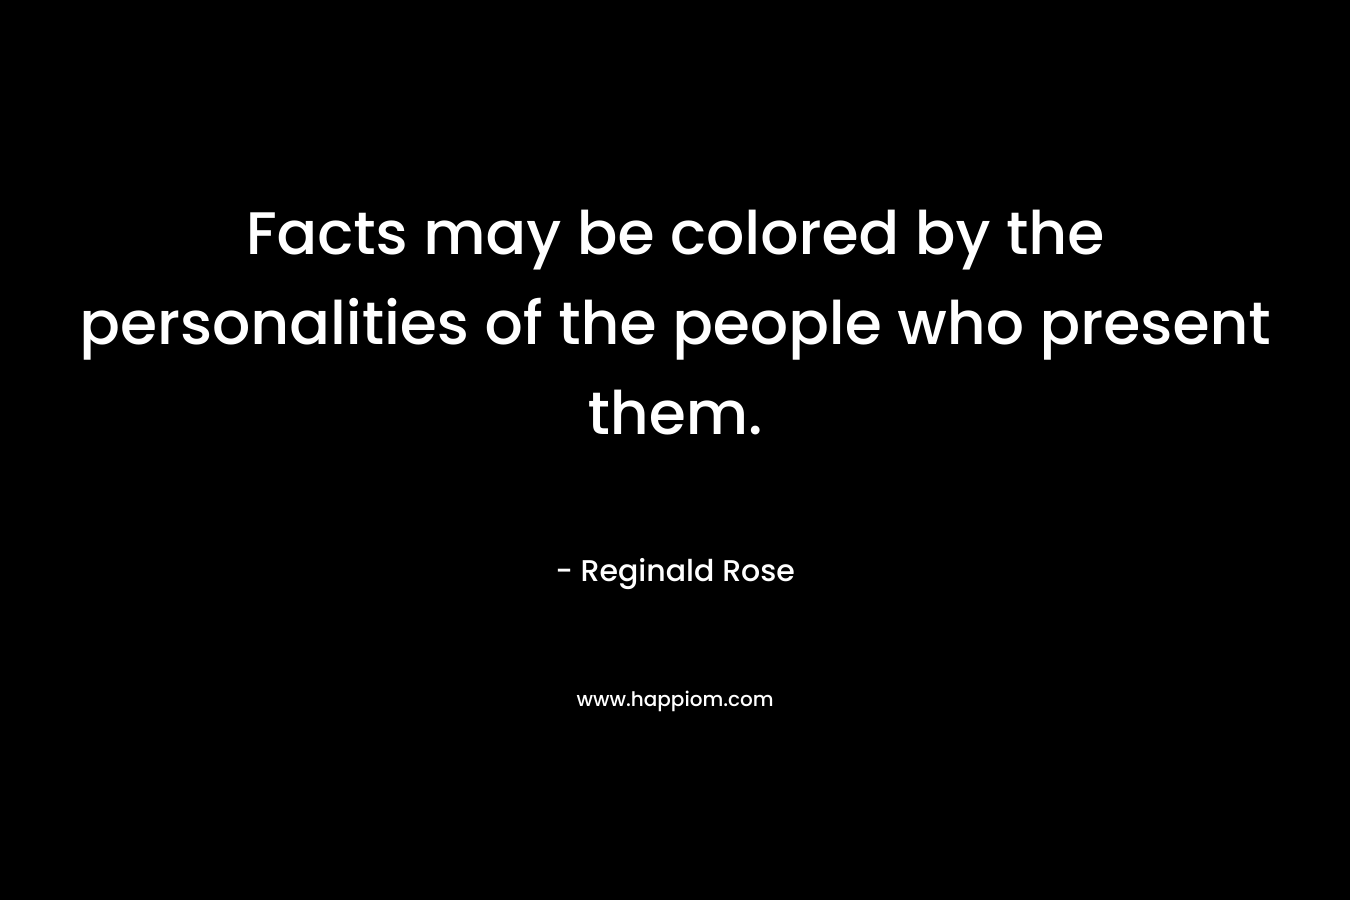 Facts may be colored by the personalities of the people who present them.